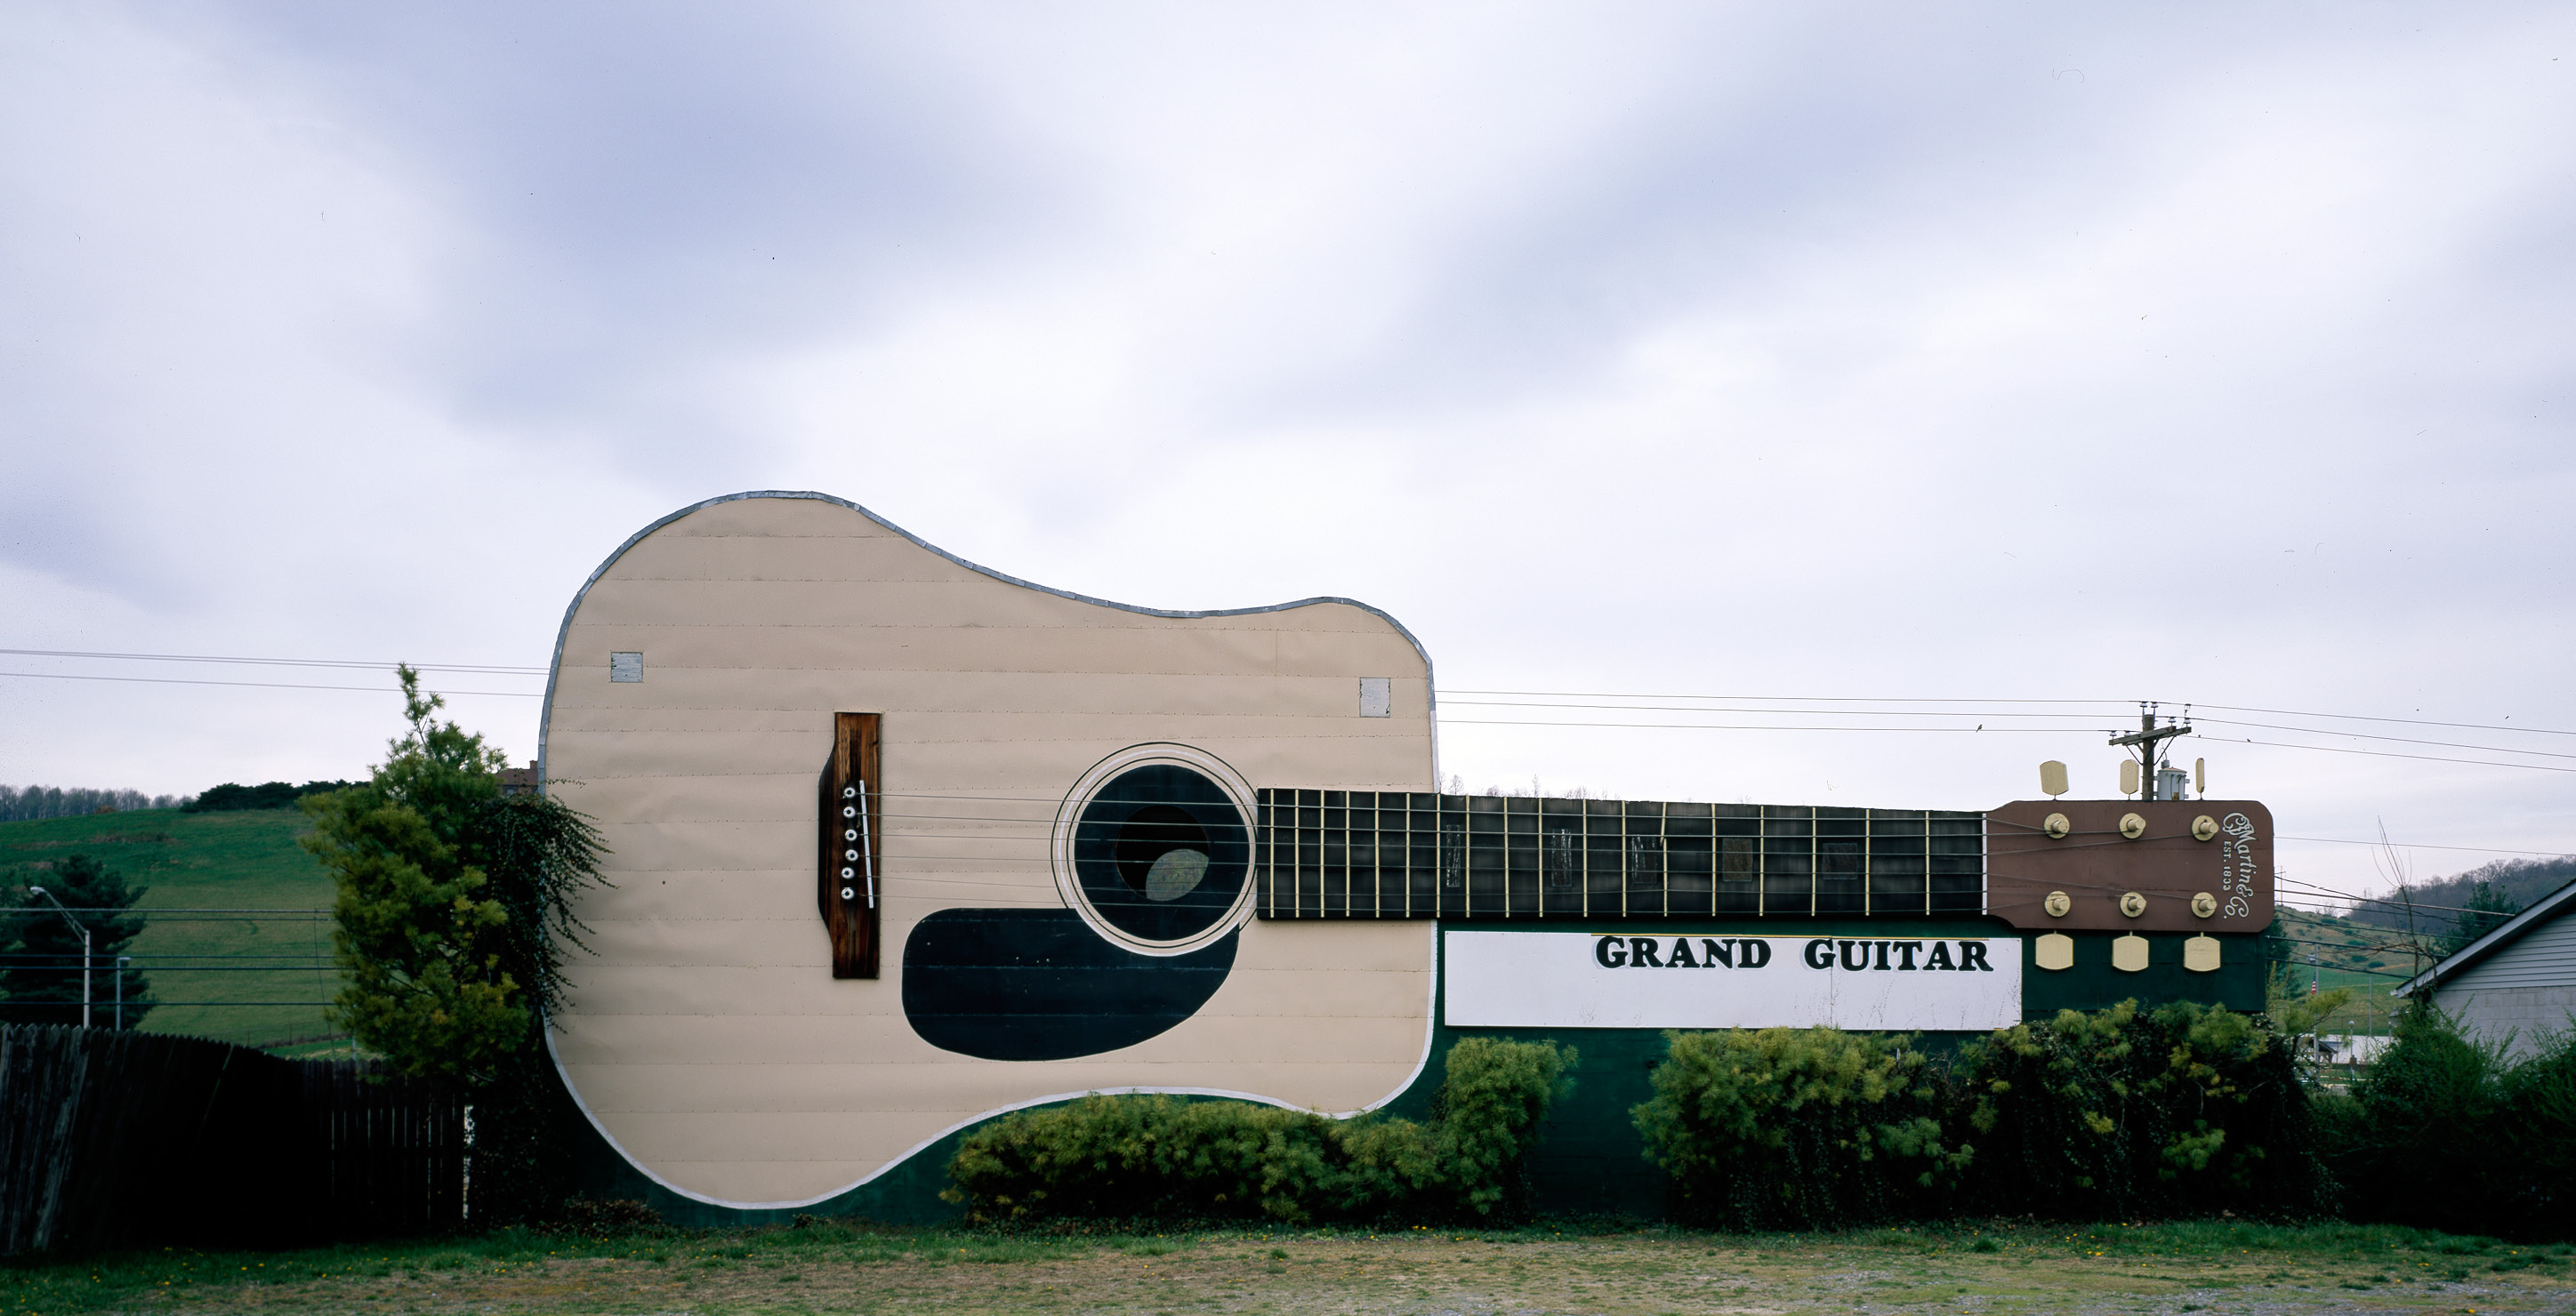 Large guitar with a sign that reads 'Grand guitar'